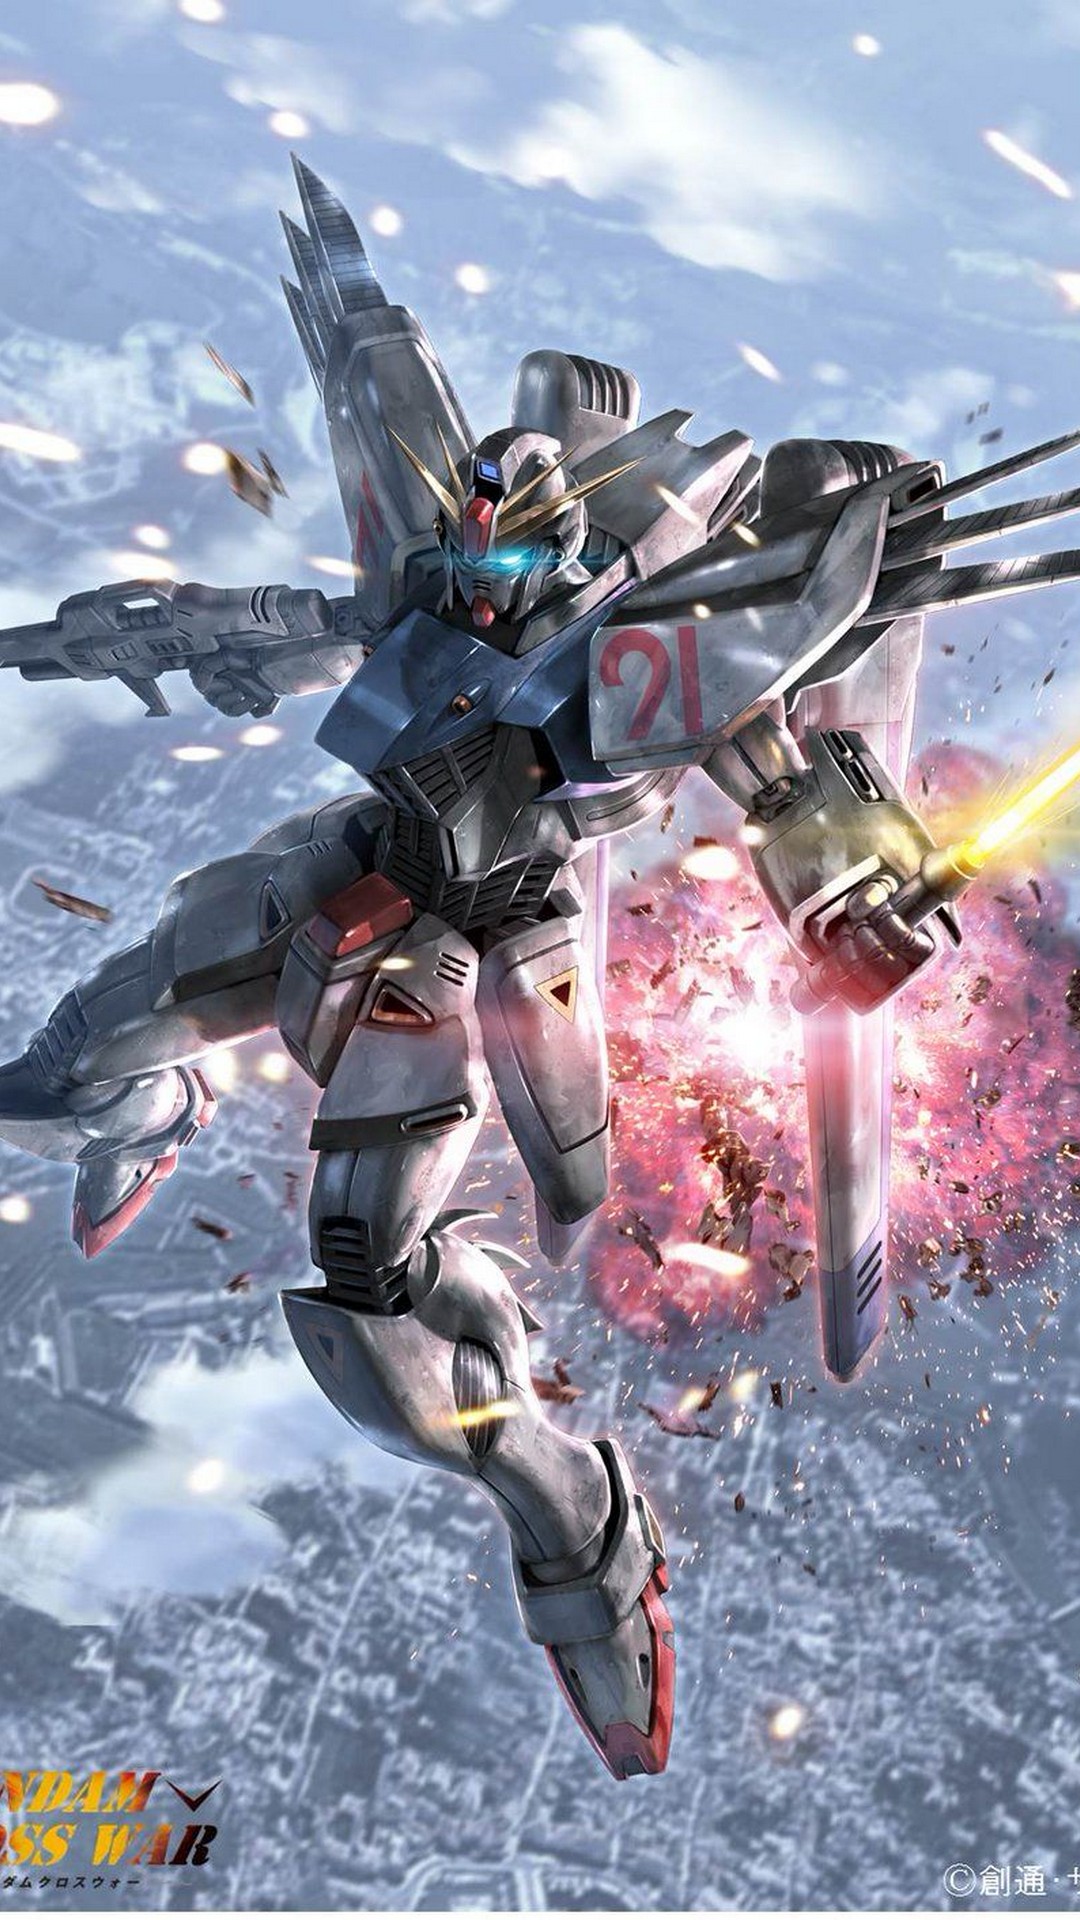 Wallpaper Gundam Android With high-resolution 1080X1920 pixel. You can use this wallpaper for your Android backgrounds, Tablet, Samsung Screensavers, Mobile Phone Lock Screen and another Smartphones device